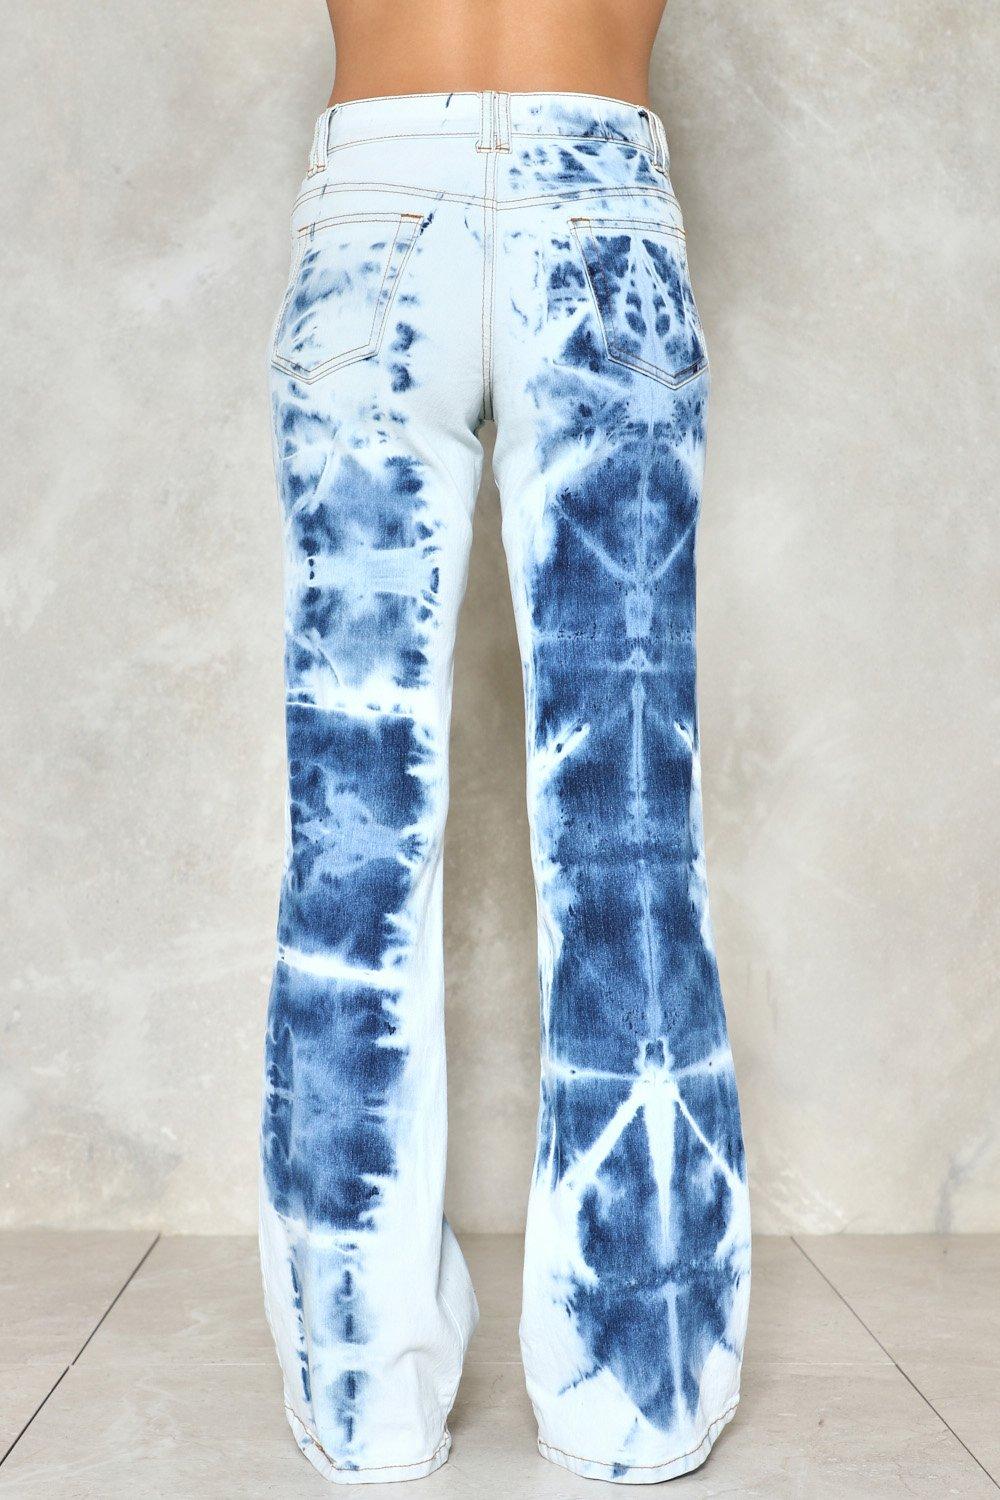 dye for jeans